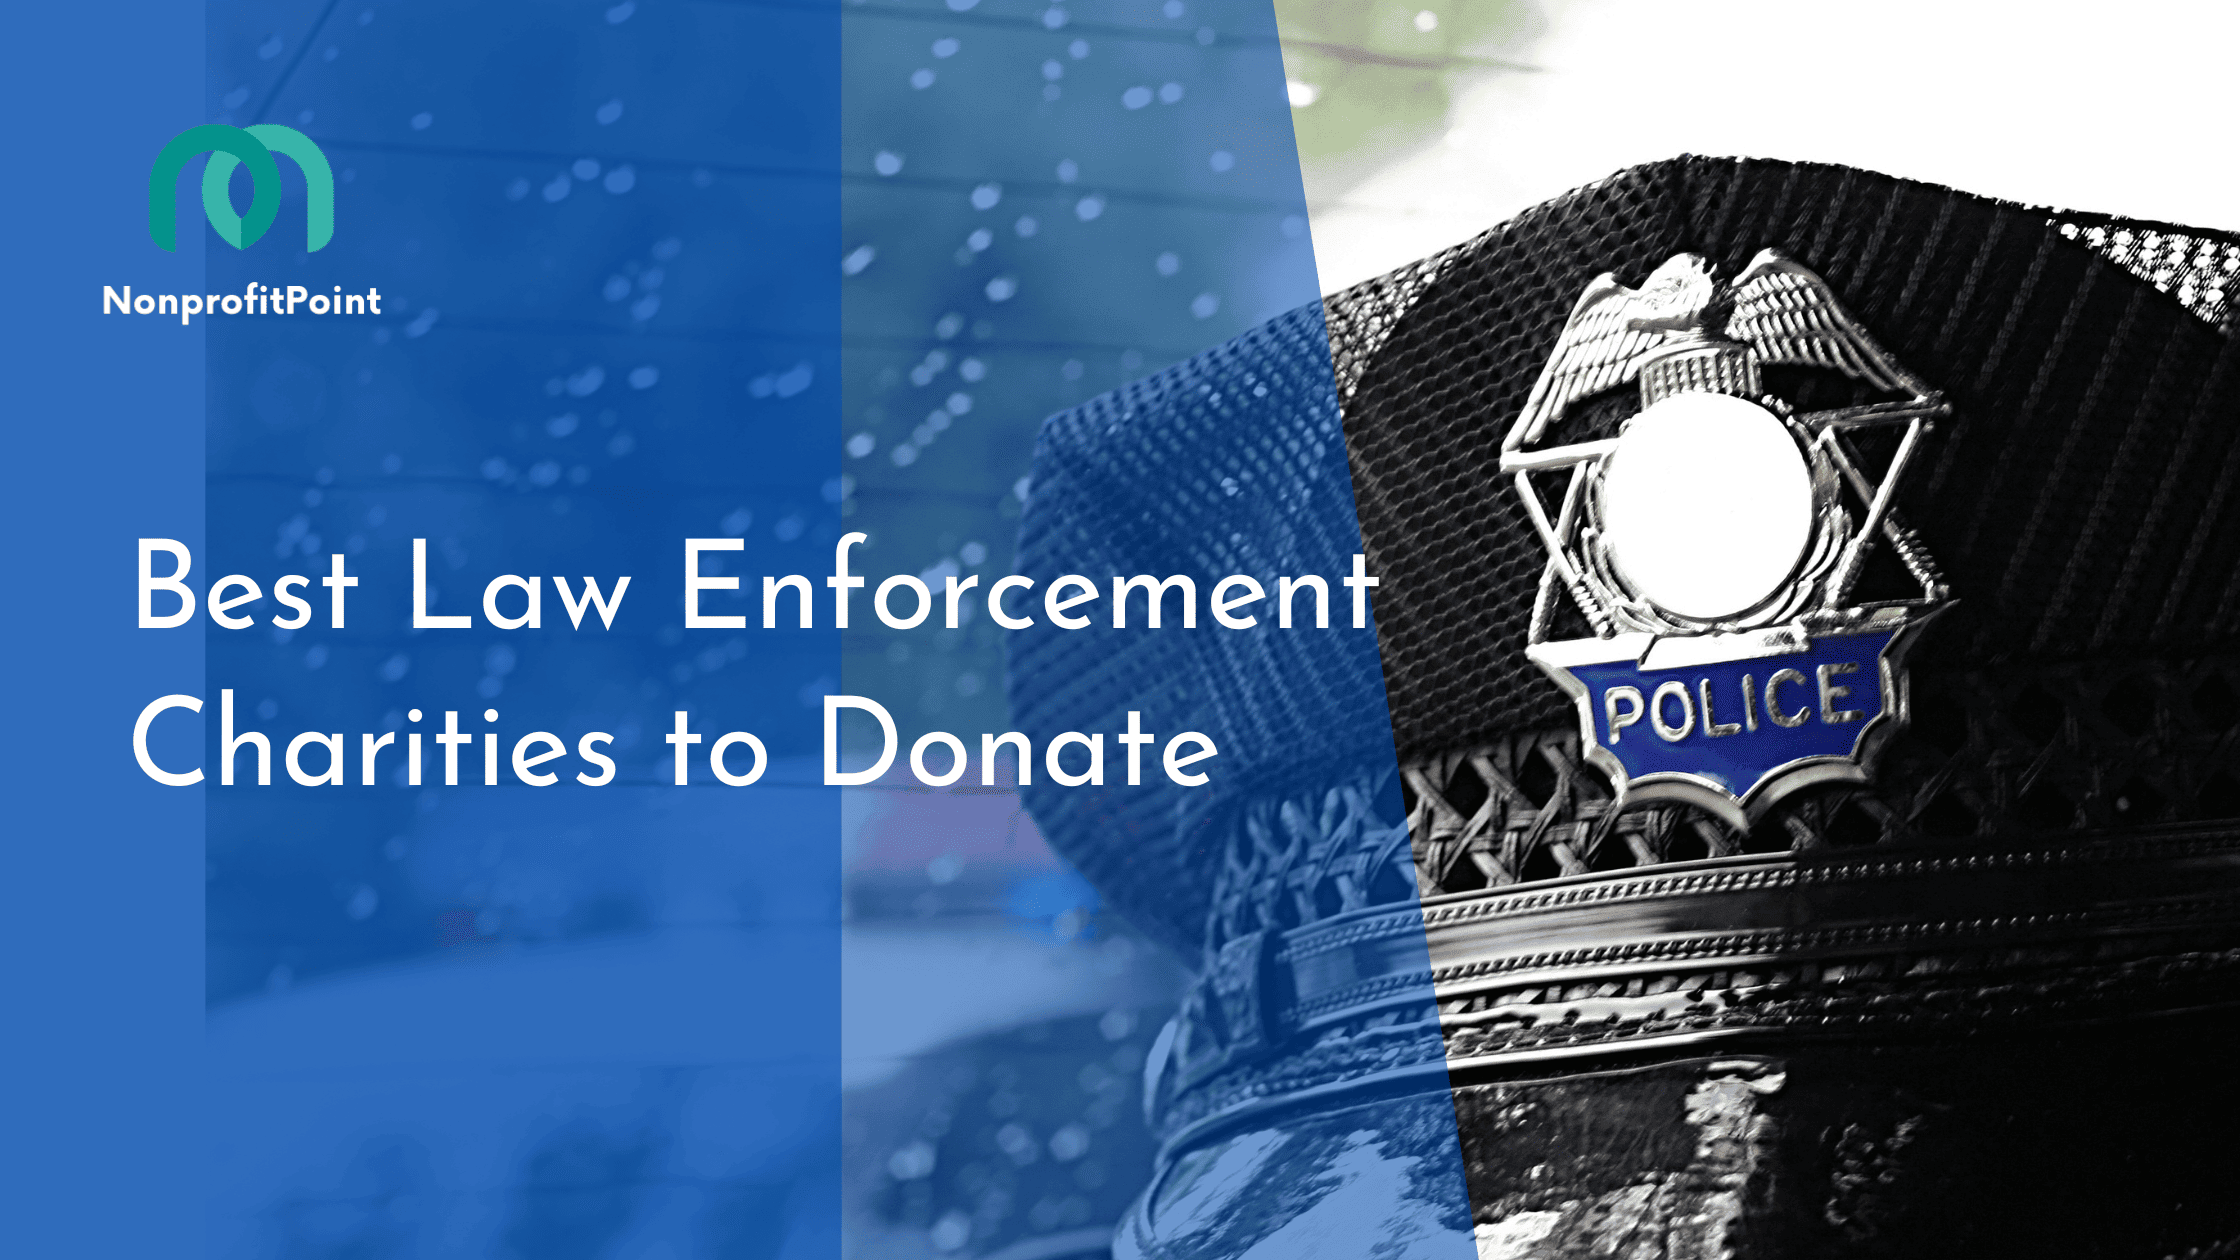 Best Law Enforcement Charities to Donate